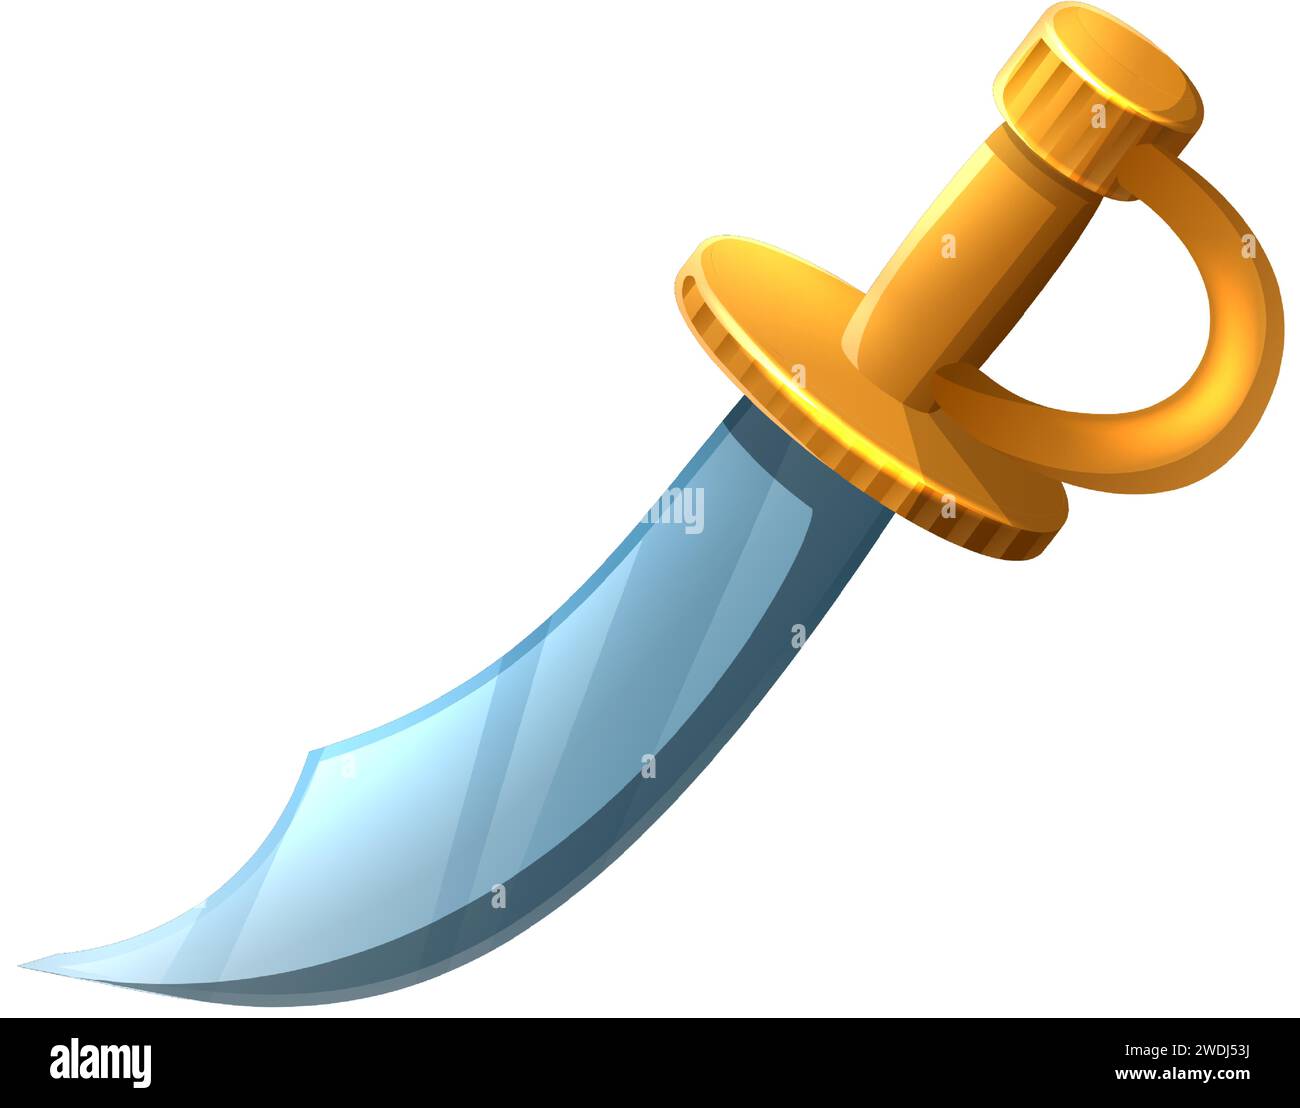 cartoon style icon illustration. Pirate sword with golden handle. Stock Vector